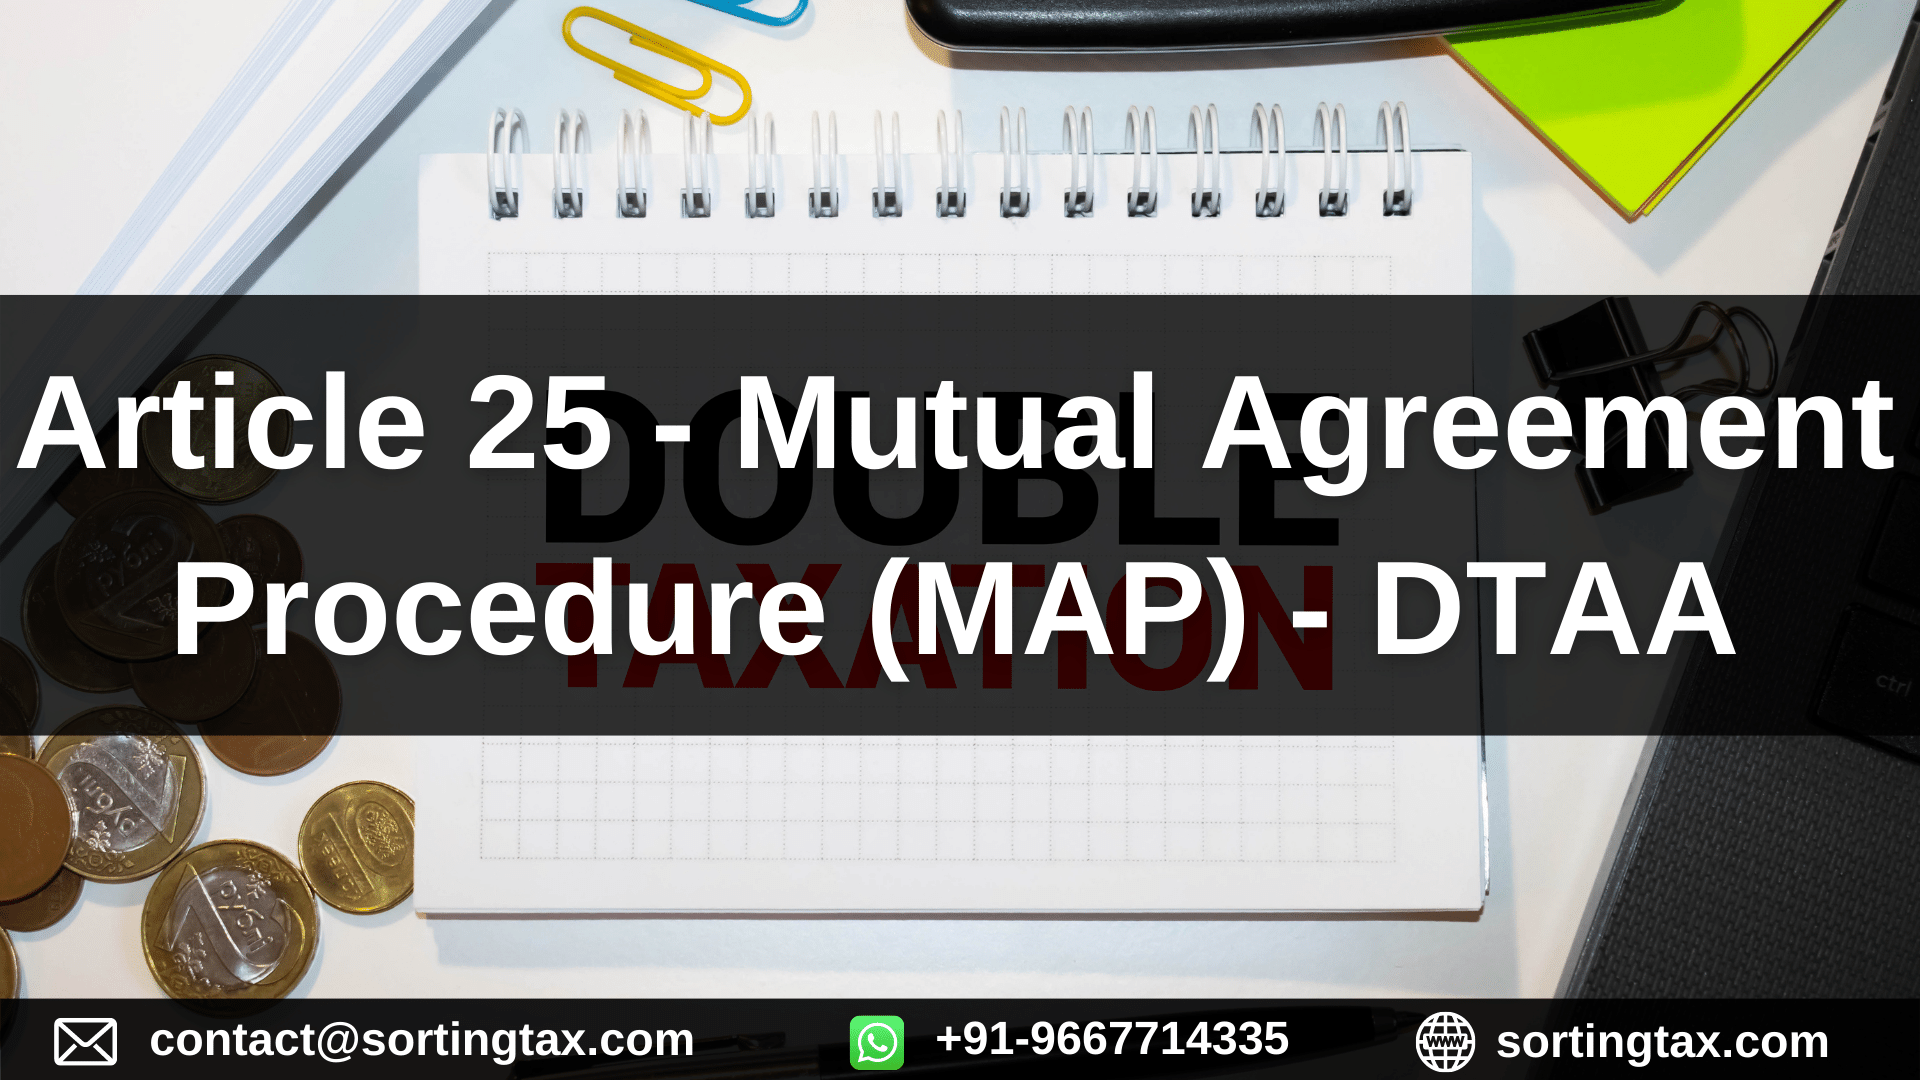 Article 25 - Mutual Agreement Procedure (MAP)